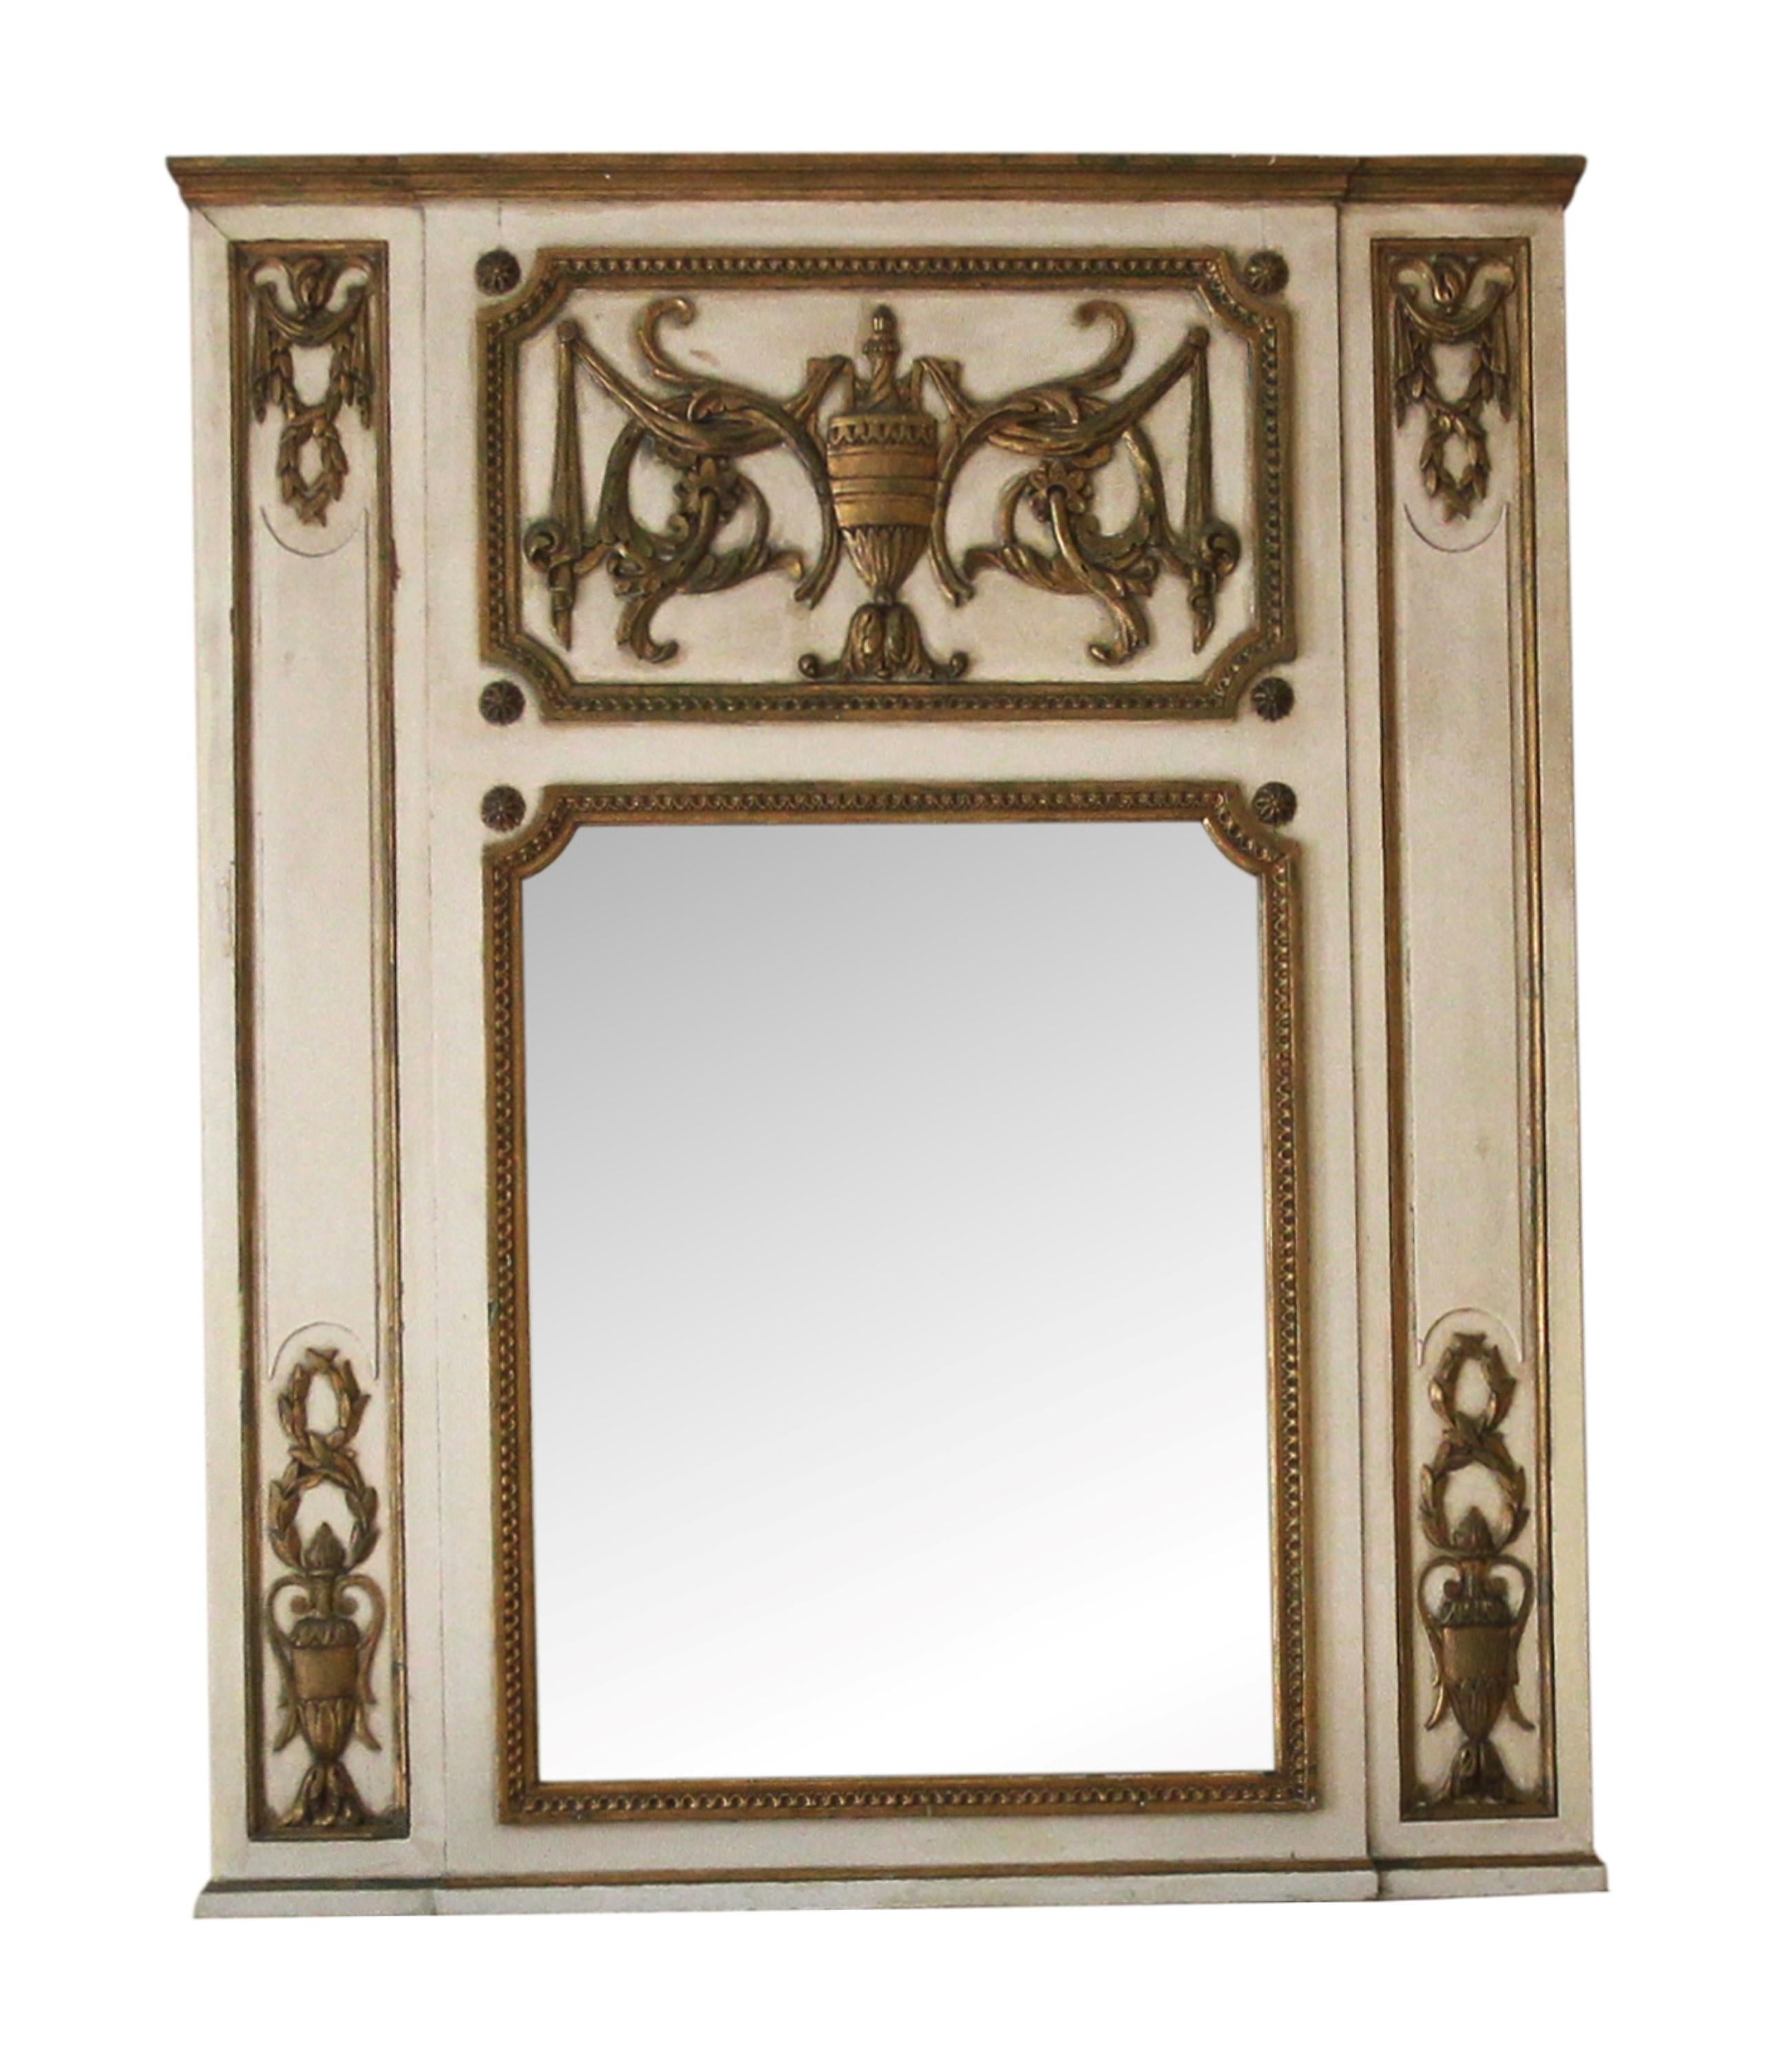 Early 20th century over mantel mirror made in France and brought over as part of the grand opening of the Waldorf Astoria Hotel on Park Ave in 1931. Retrieved from Suite 665. Original mantel not available. A Waldorf Astoria authenticity card is